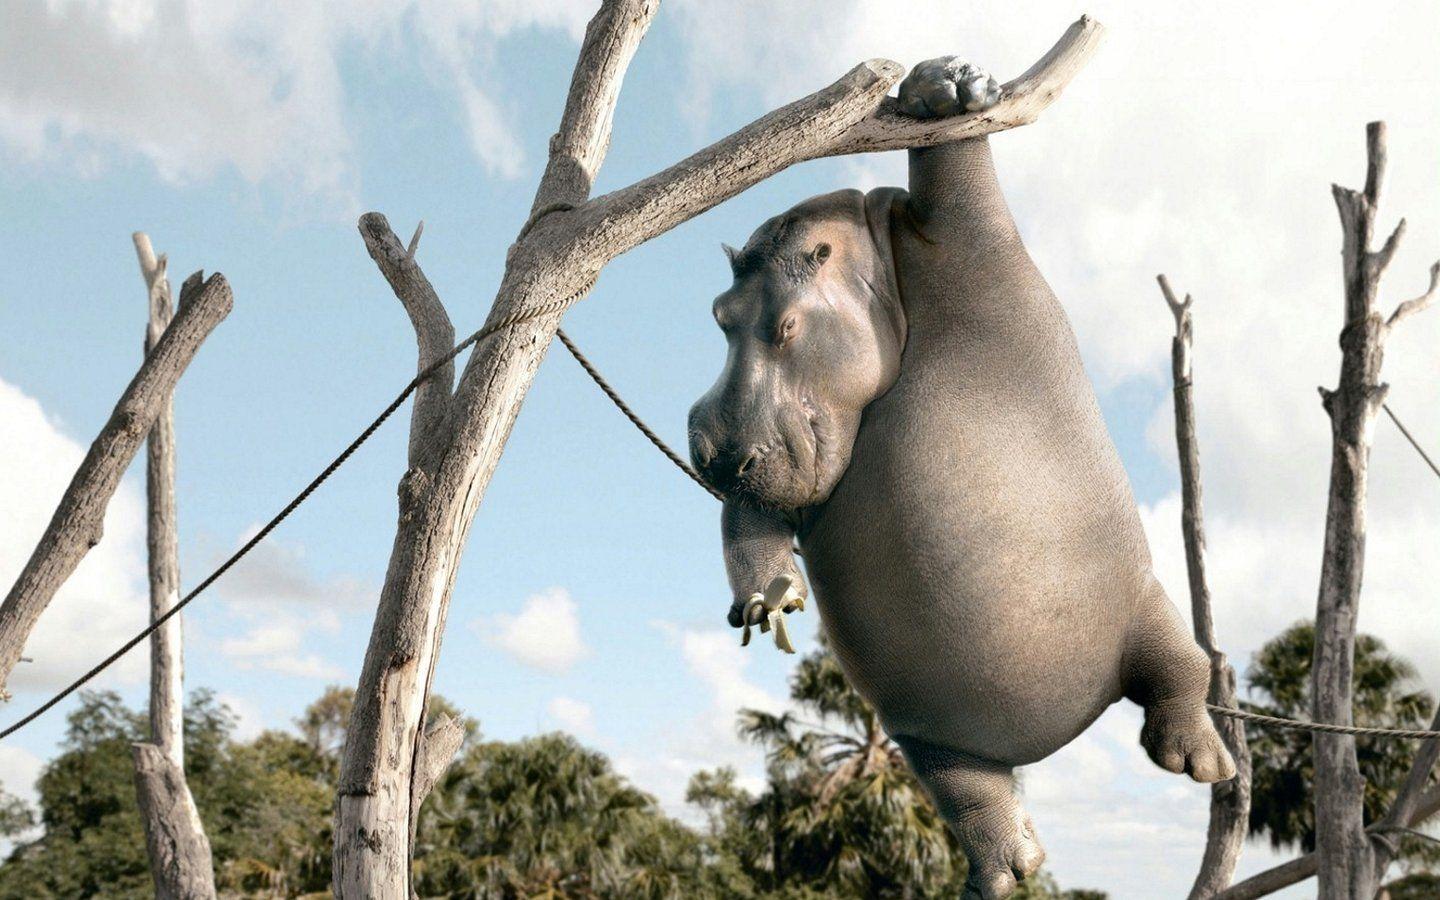 best image about Hippo c Nature wallpaper